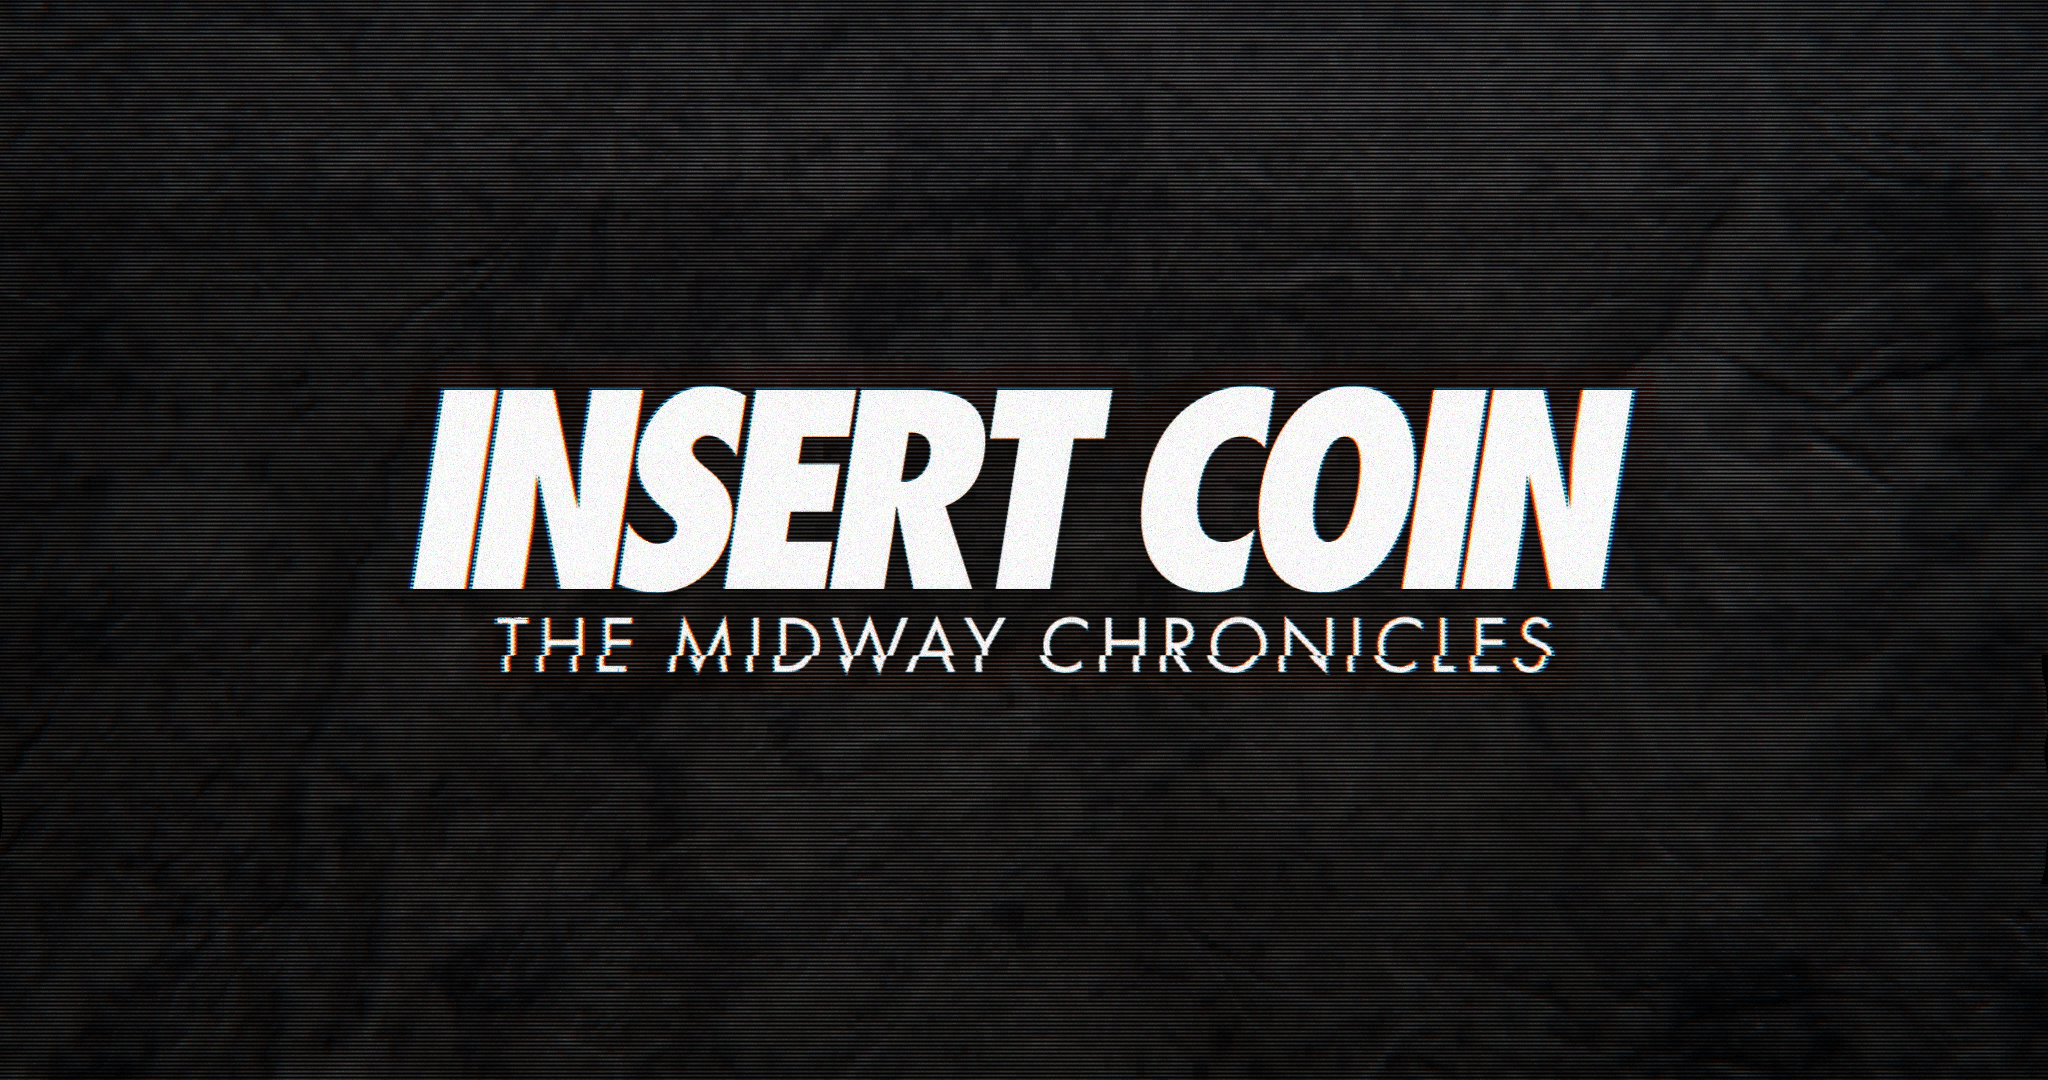 Insert Coin Review – A Documentary About the Odd Midway Coin-Op Era